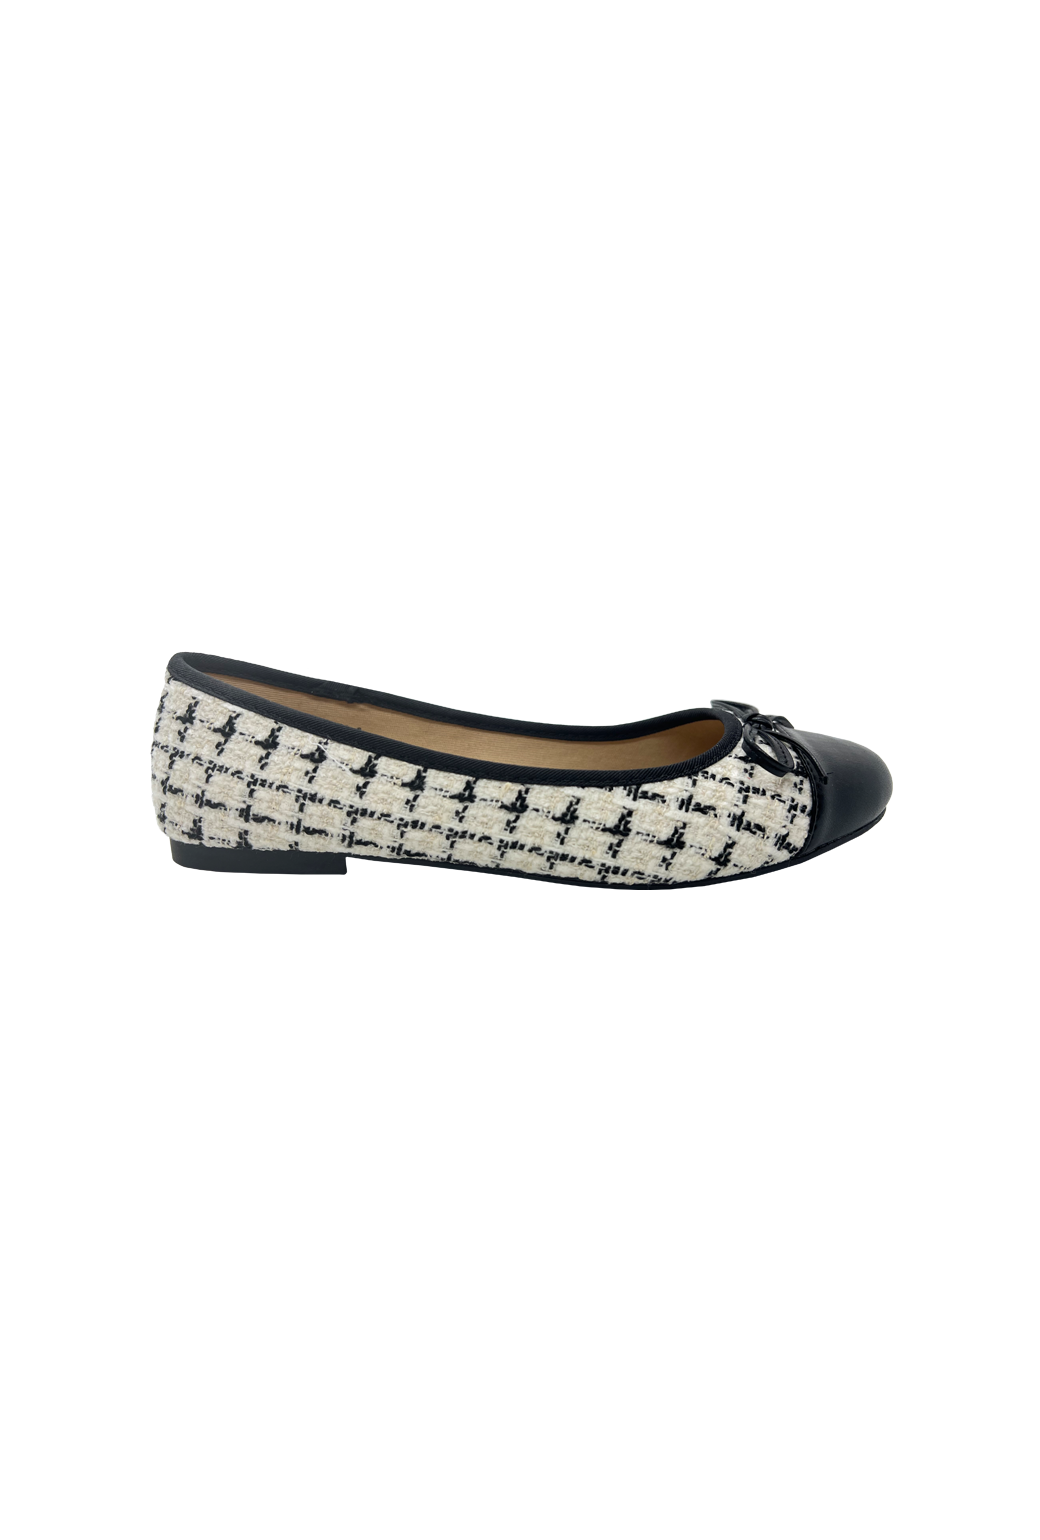 Chanel Ballet Flats: Are They Worth It? - It's Casual Blog